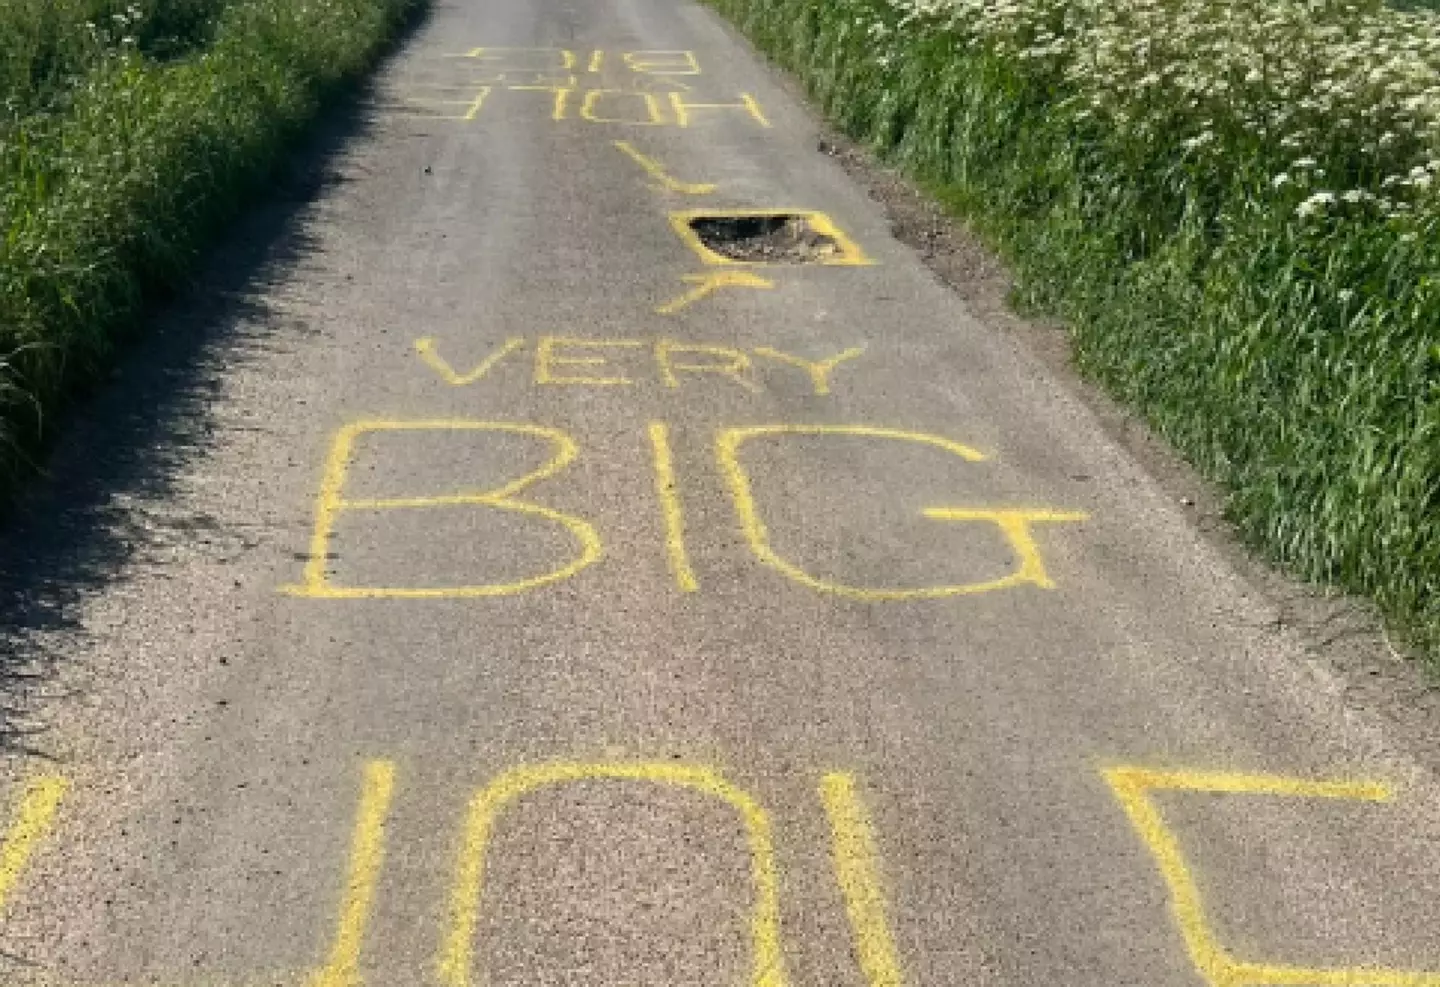 Some mystery 'artist' is helpfully pointing out the pothole to motorists.